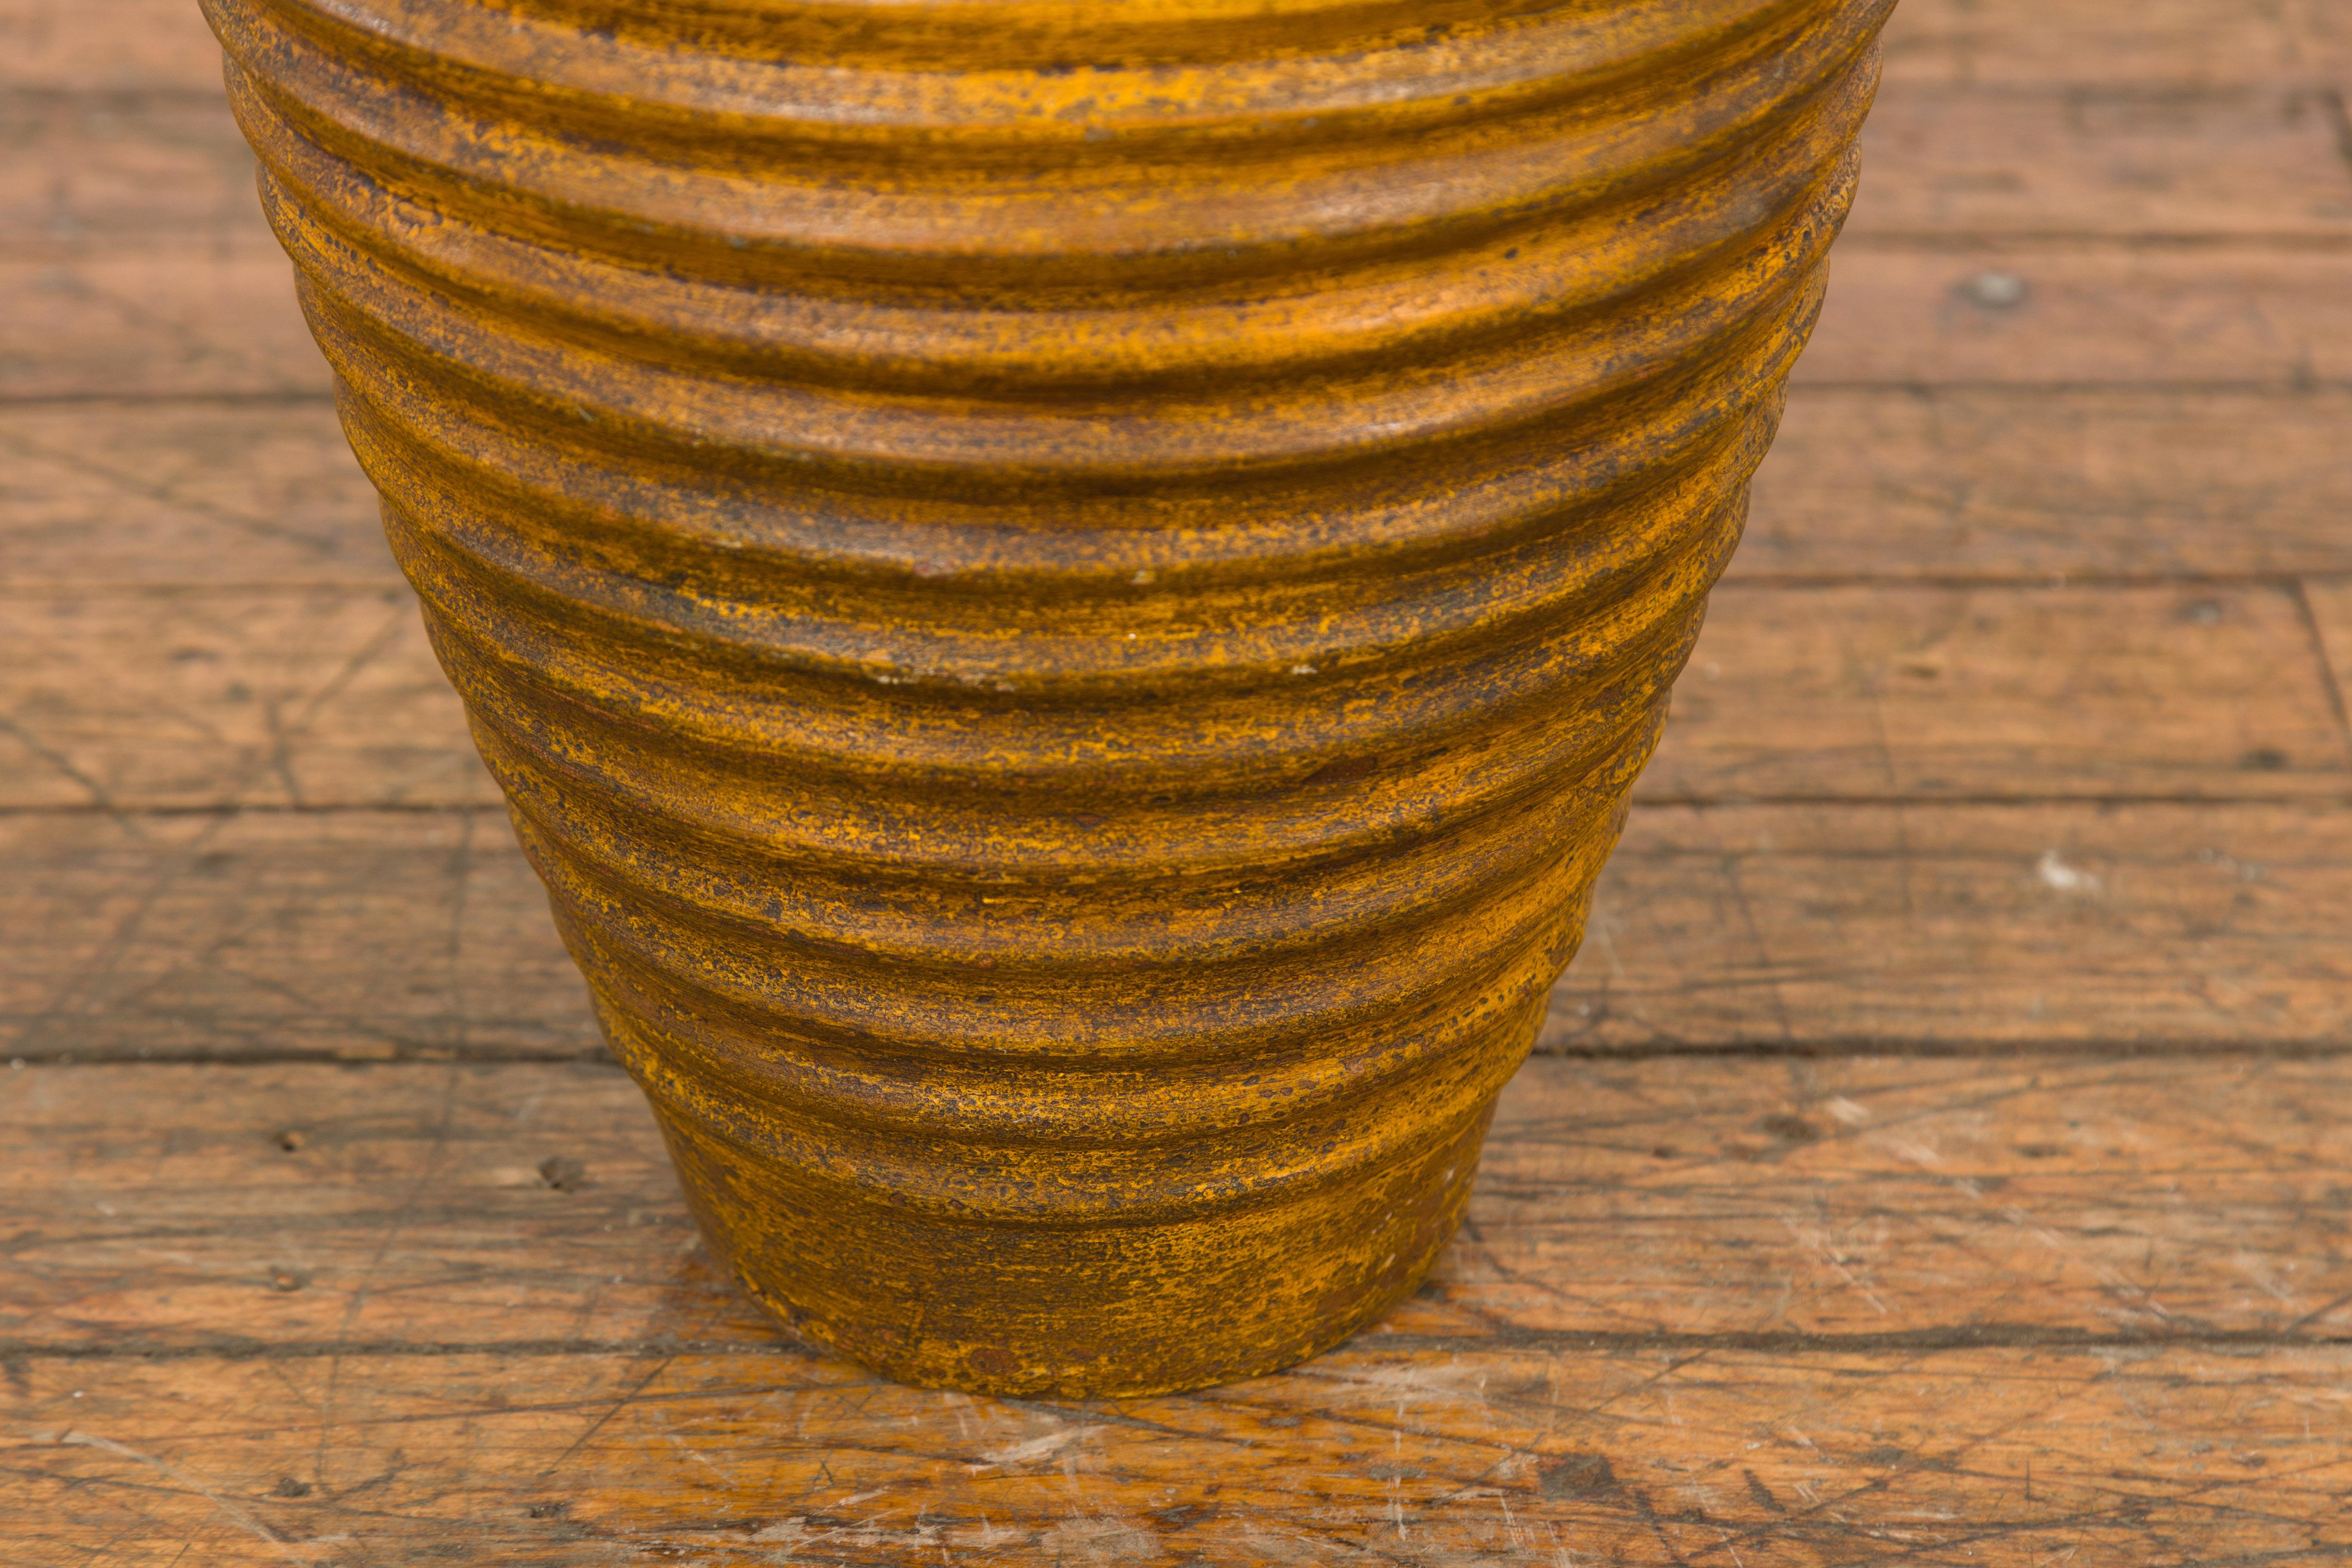 Yellow and Brown Storage Vase with Concentric Design and Rustic Character 2